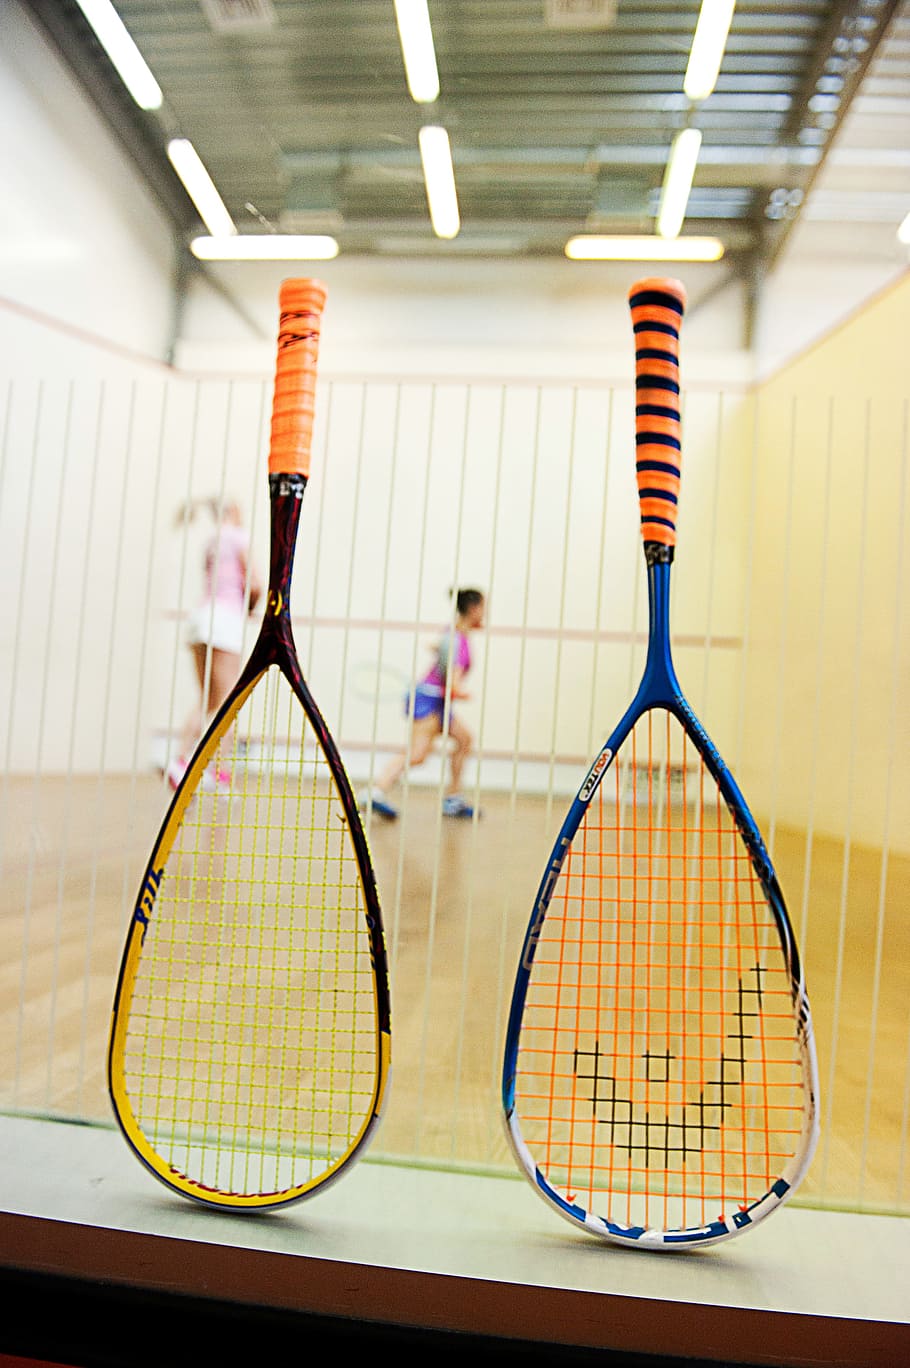 Squash rackets, lifestyle, objects, sport, tennis, competitive Sport